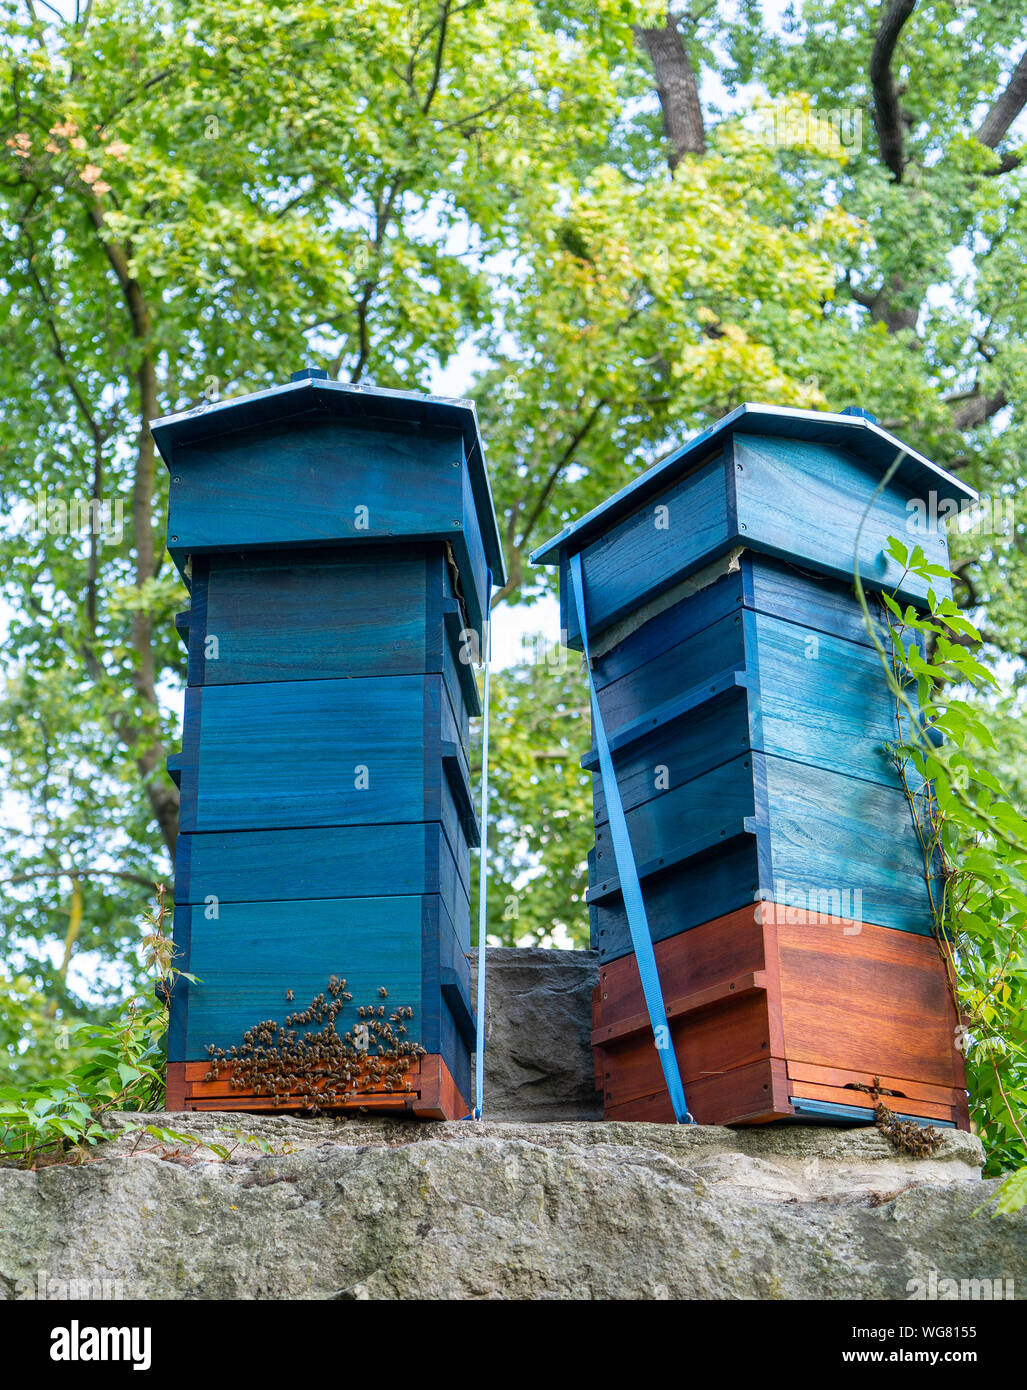 Two beehives (blue and brown) standing on top a stone structure with bees buzzing busily on their front doors. Trees are in the background. Stock Photo